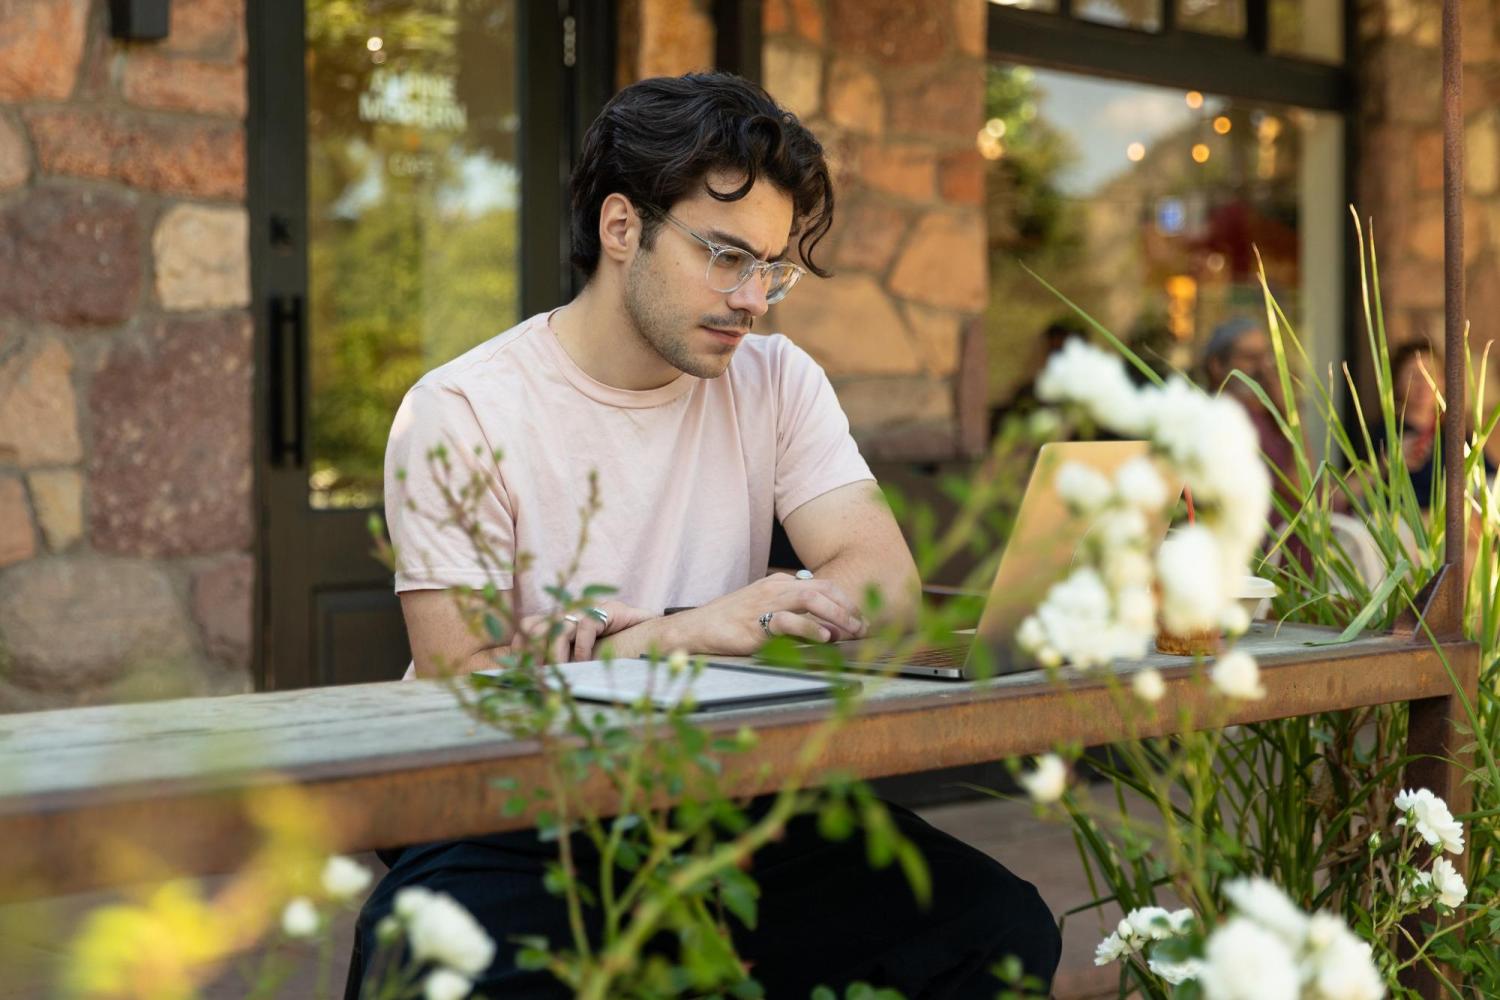 A student works on his laptop on a cafe patio